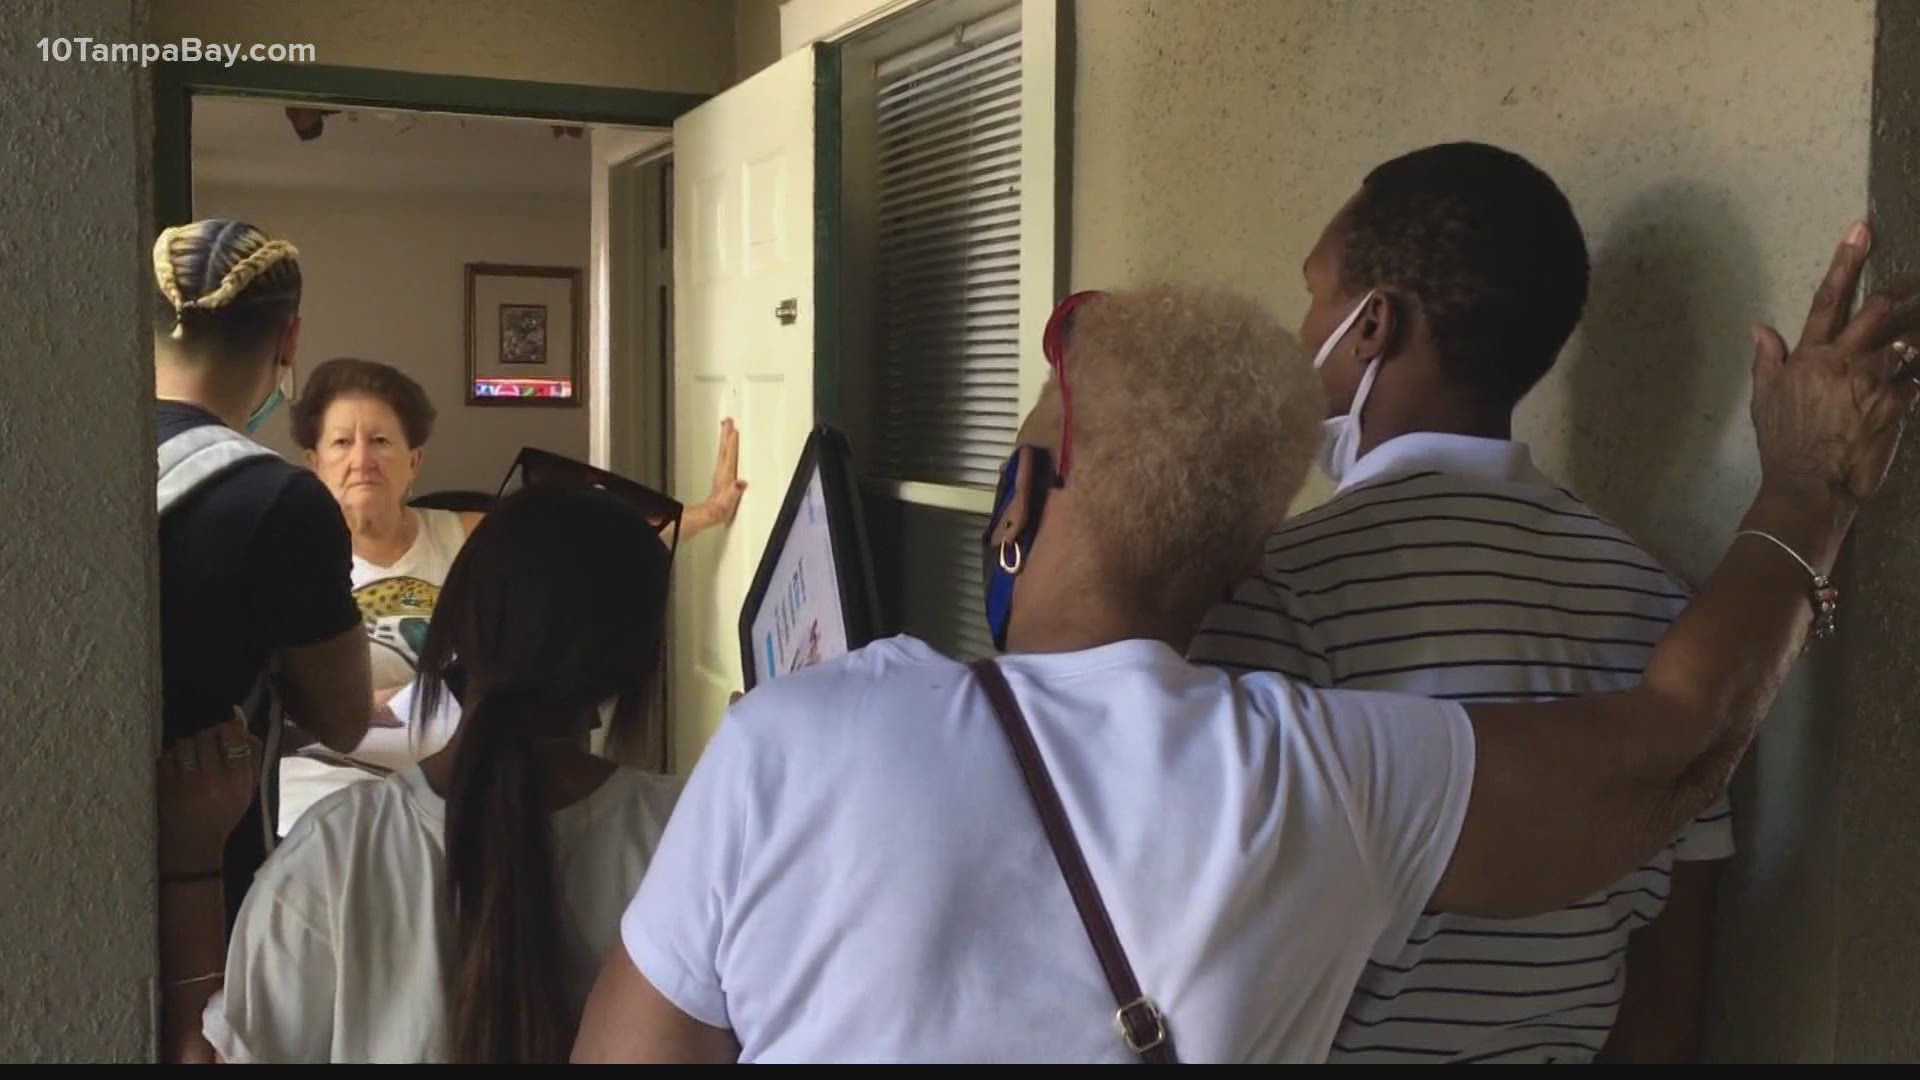 Canvassers are going door-to-door in mostly underserved neighborhoods to let people know about the availability of COVID vaccines and how they can get them.